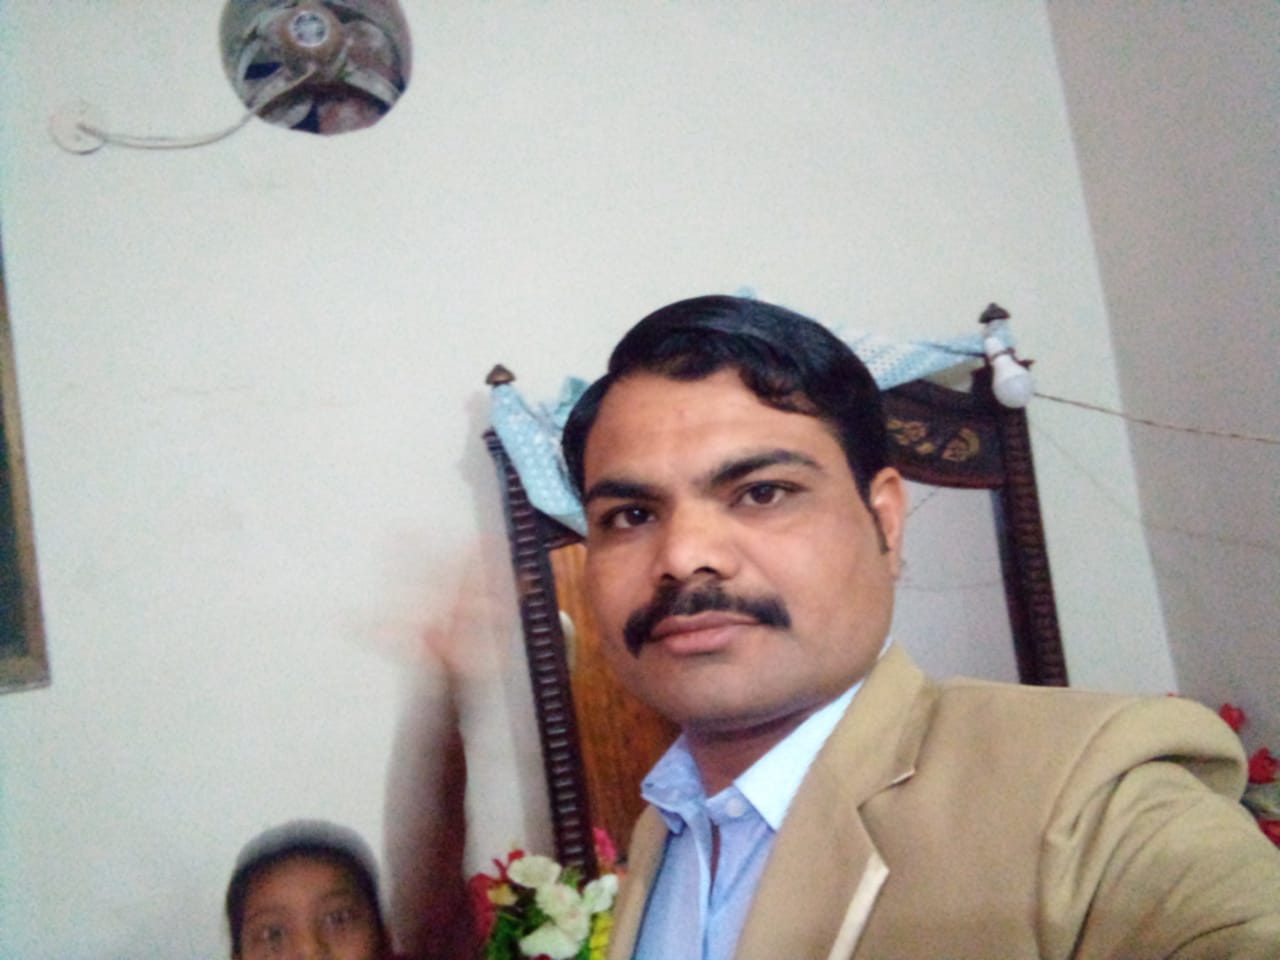 hi my name is Nisar Ahmad from Pakistan.i am provide high quality guest post websites for more grow of your business and income also.please let me know if you are intrusted.